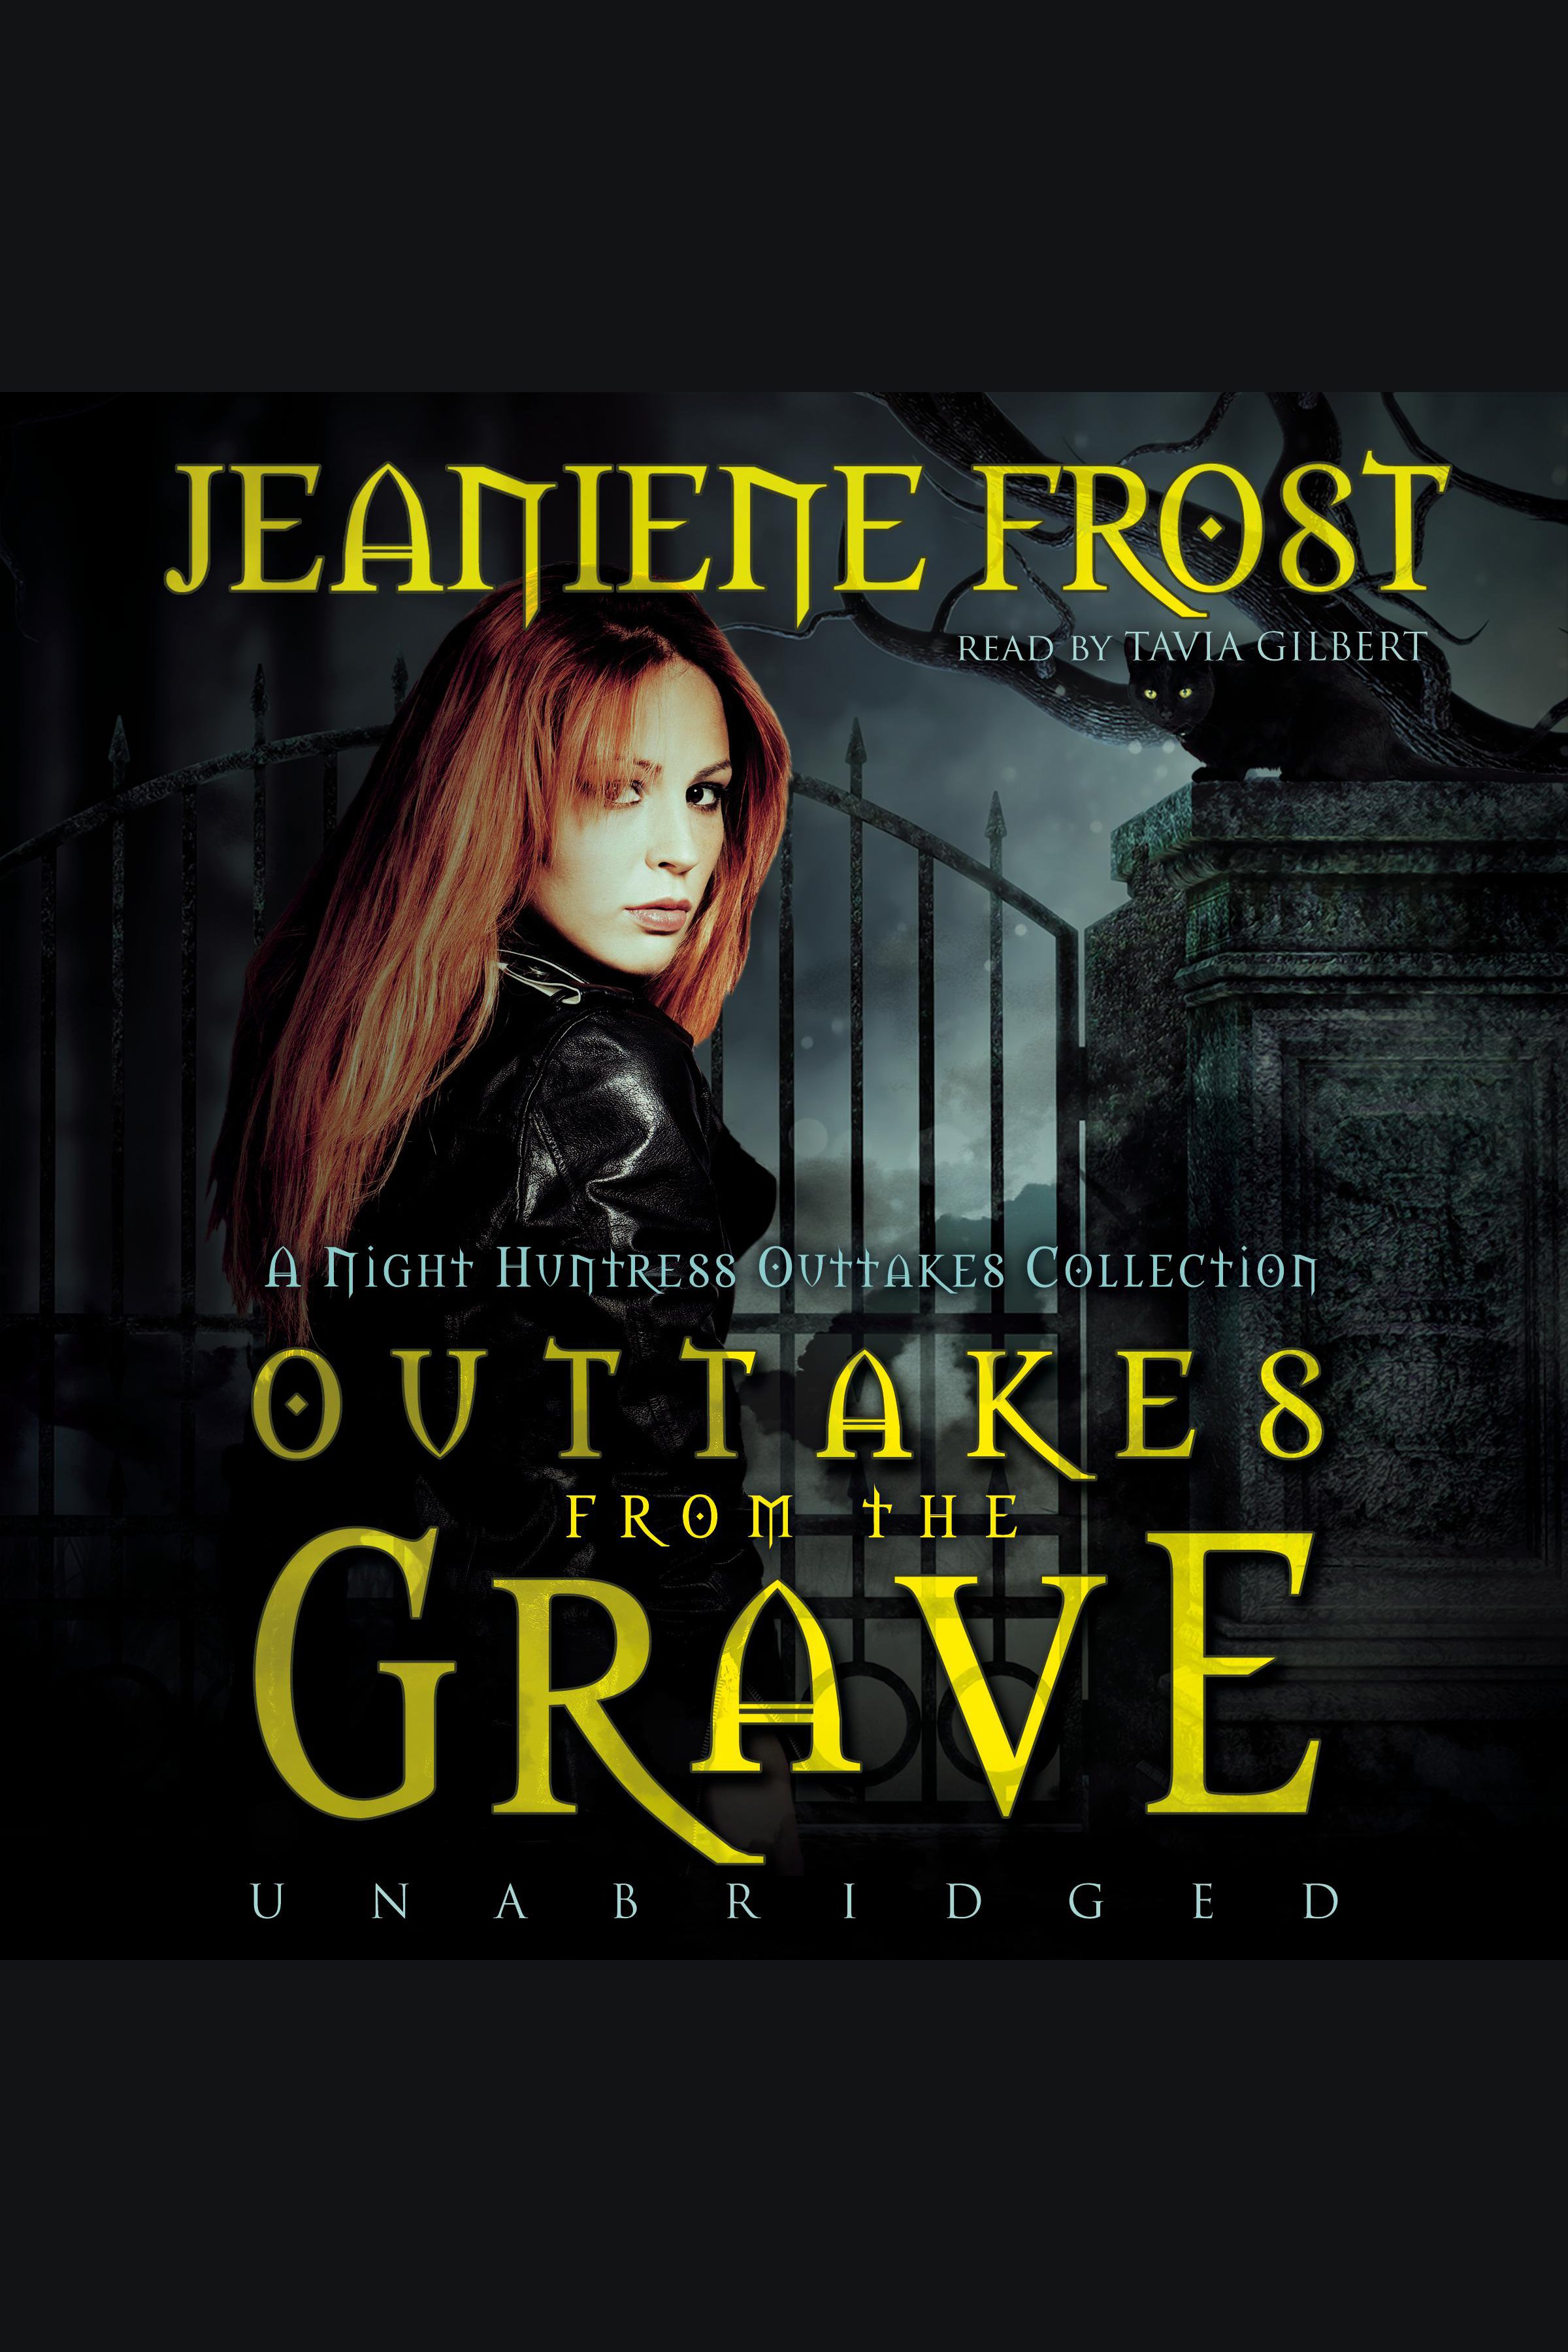 Umschlagbild für Outtakes from the Grave [electronic resource] : A Night Huntress Outtakes Collection